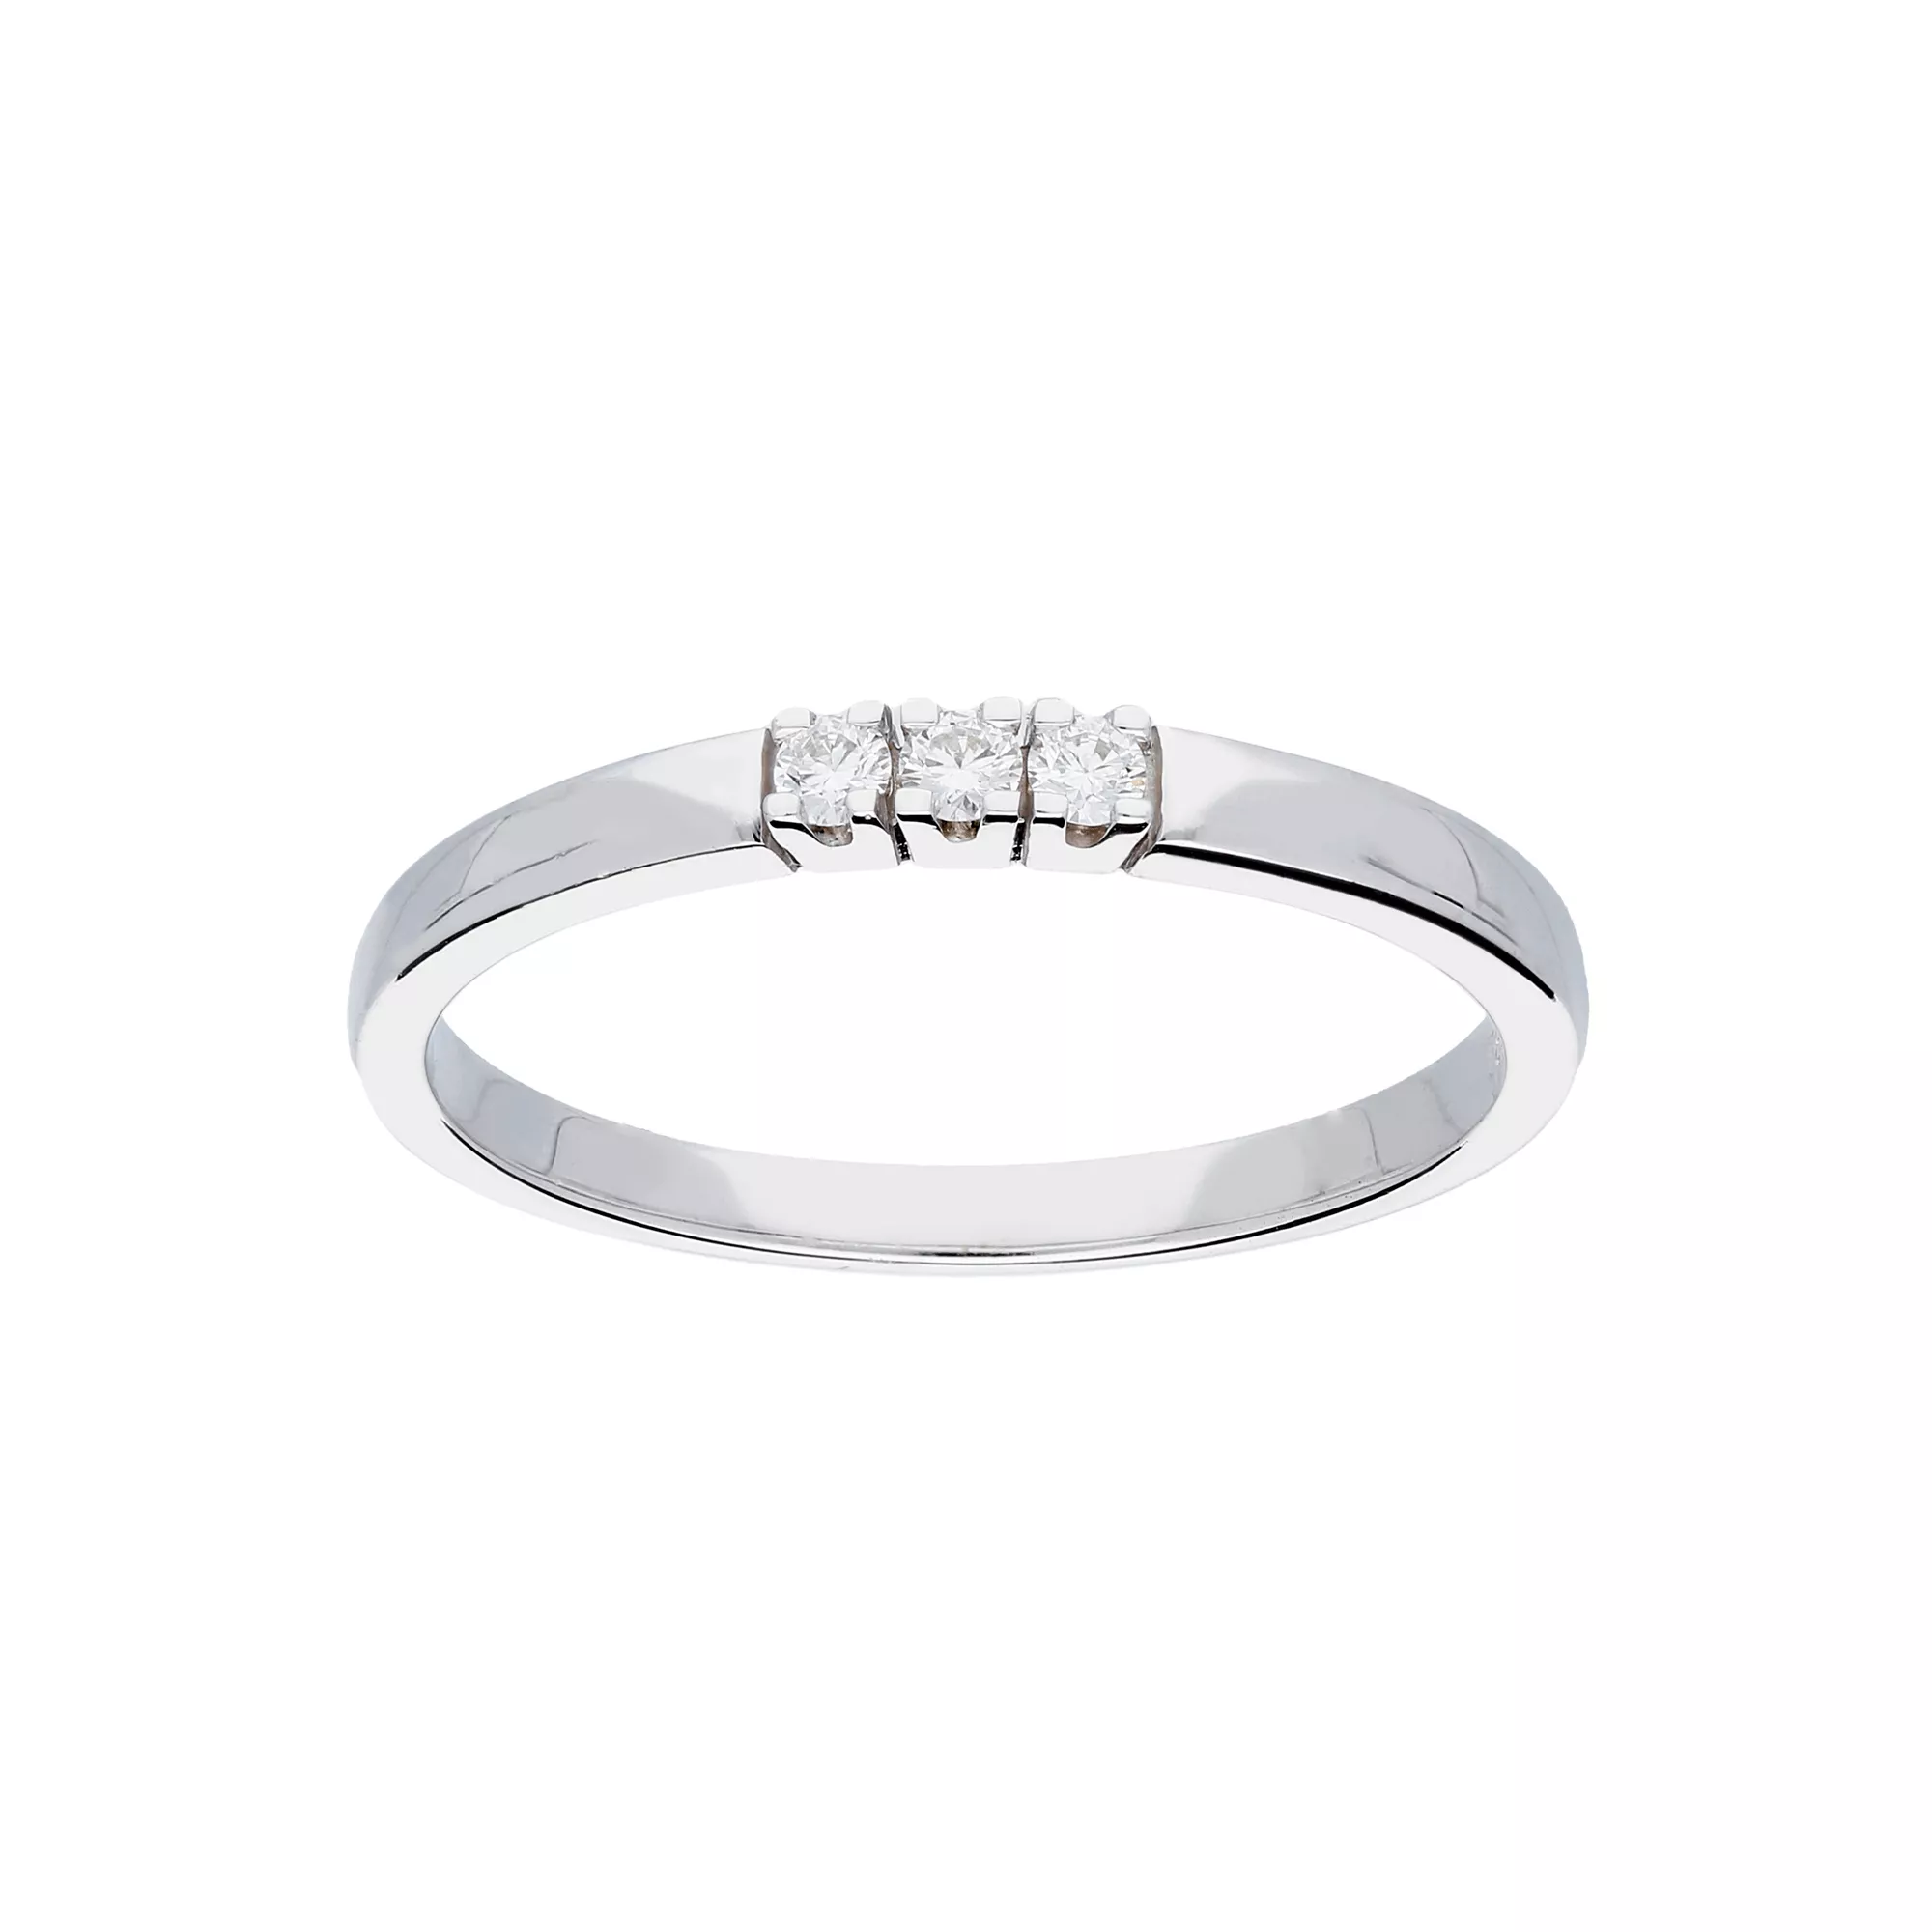 Glow Witgouden Ring - Glanzend Diamant 3- 0.06ct G/si 214.3016.52